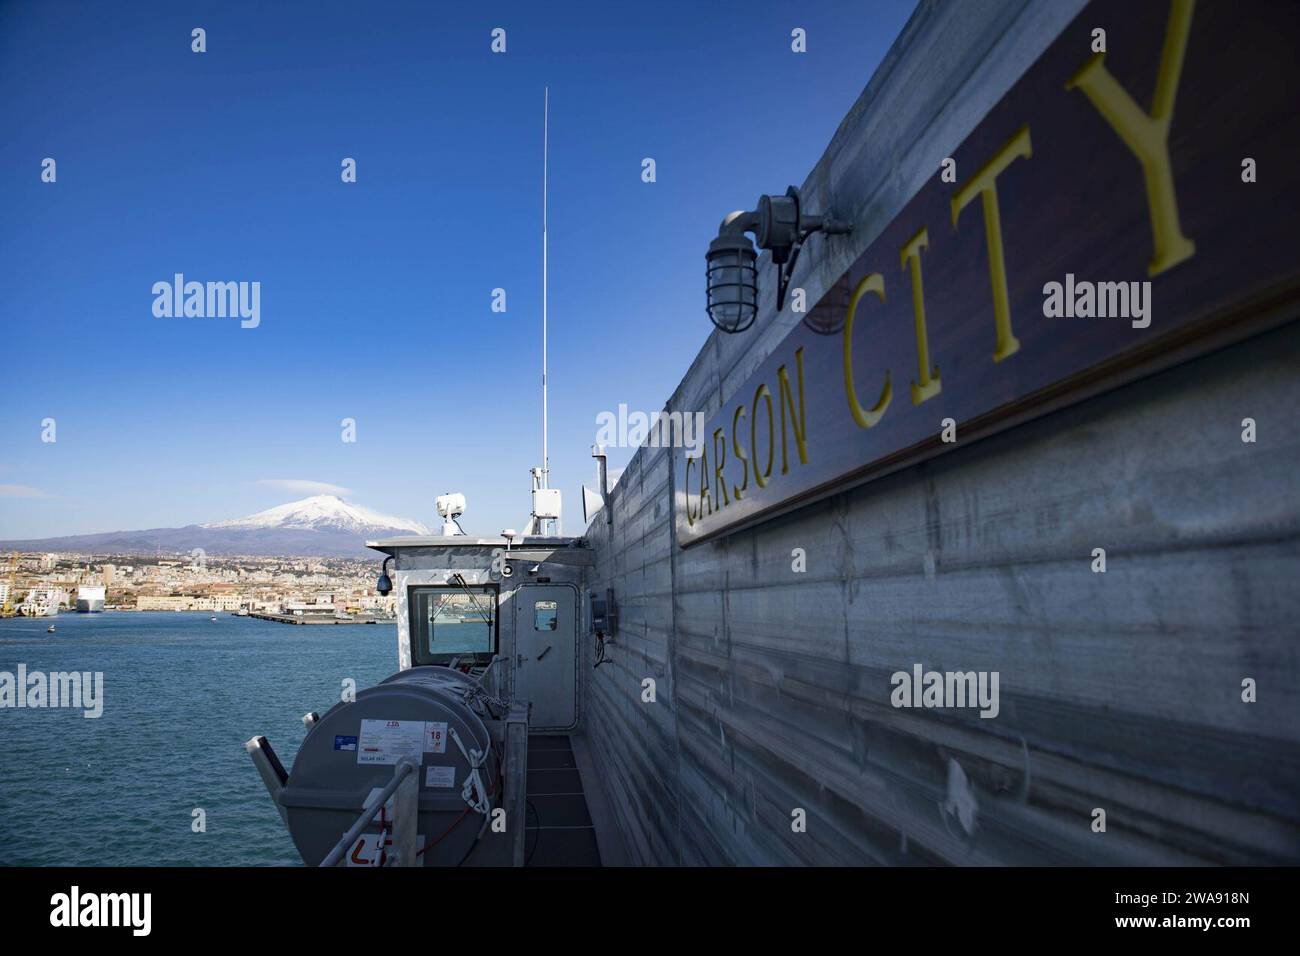 US military forces. 180307JI086-109 CATANIA, Italy (March 7, 2018) The Spearhead-class expeditionary fast transport ship USNS Carson City (T-EPF 7) arrives in Catania, Italy, March 7, 2018. Carson City is conducting naval operations in the U.S. 6th Fleet area of operations to advance security and stability in the region. (U.S. Navy photo by Mass Communication Specialist 3rd Class Ford Williams/Released) Stock Photo